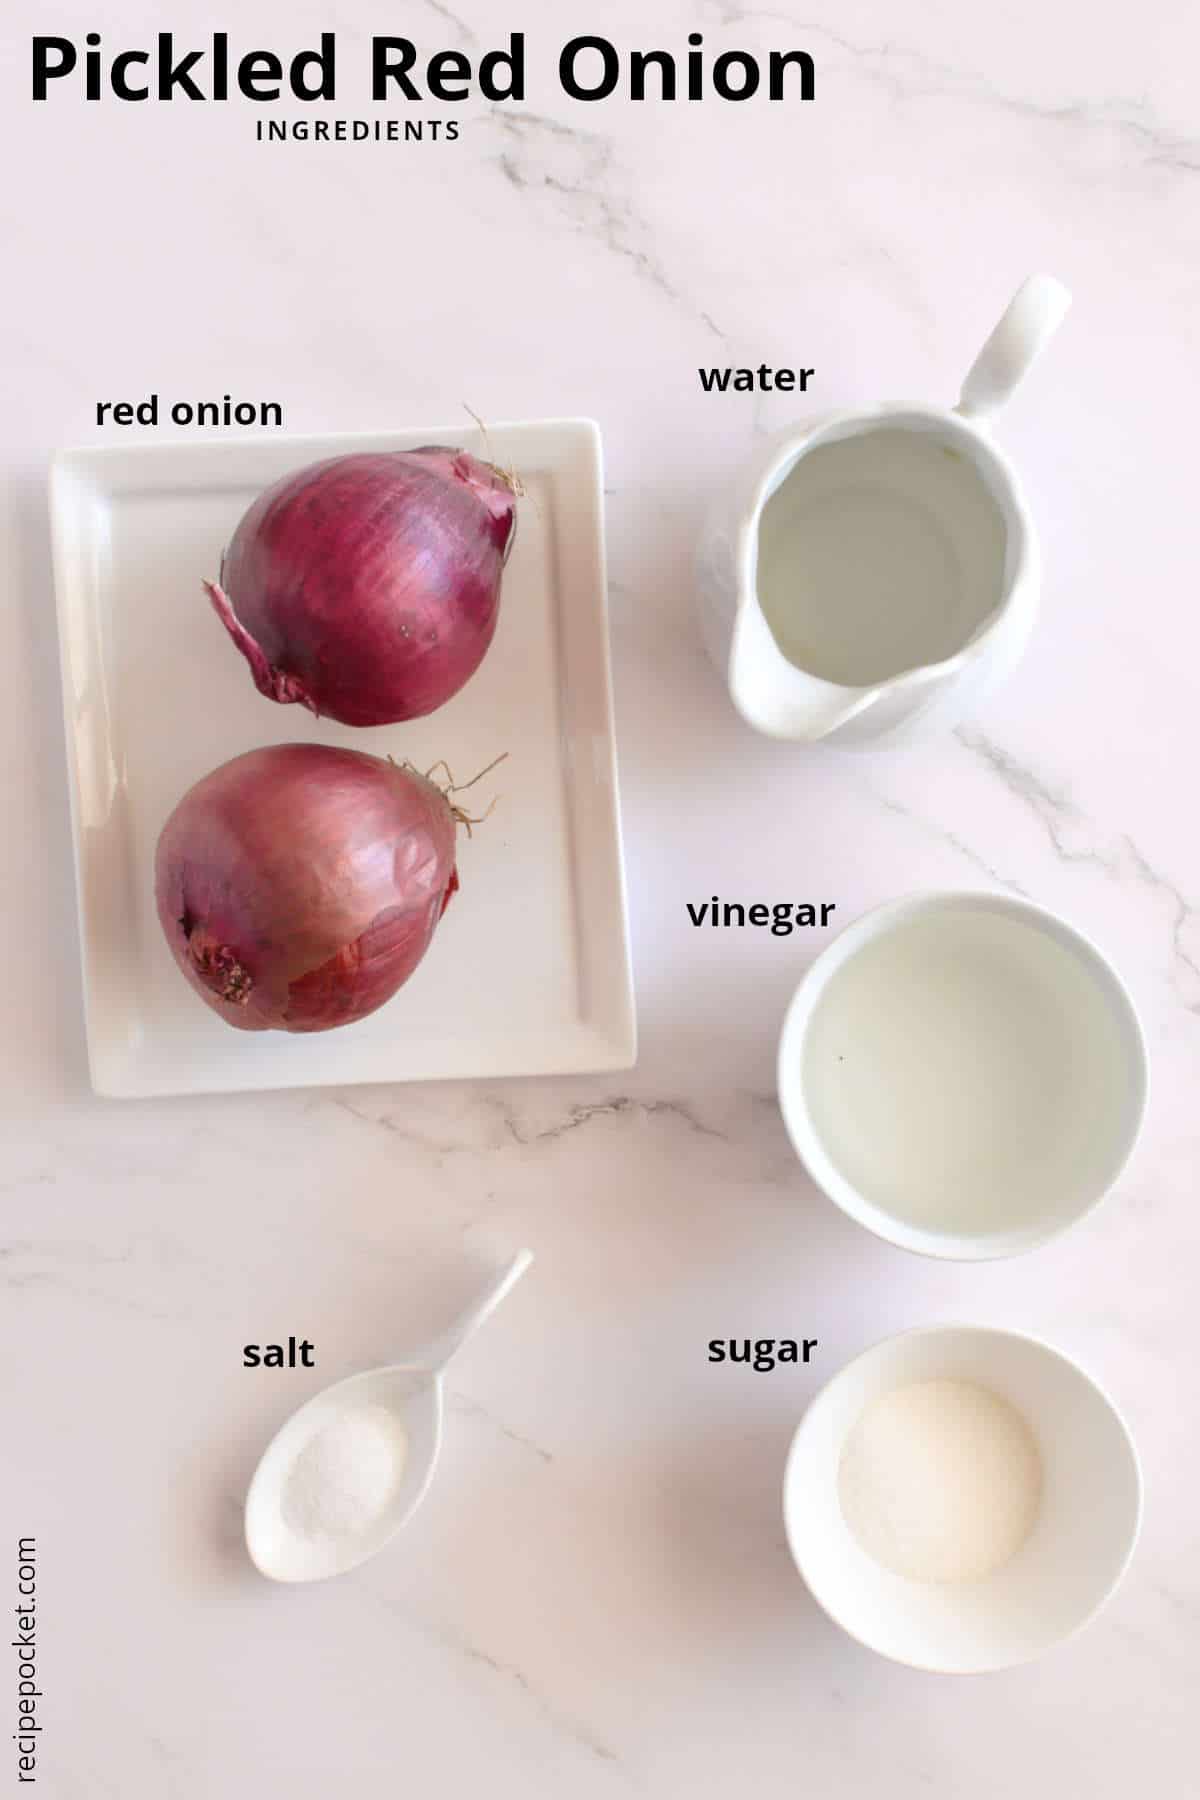 Image showing ingredients need to make an onion pickle.